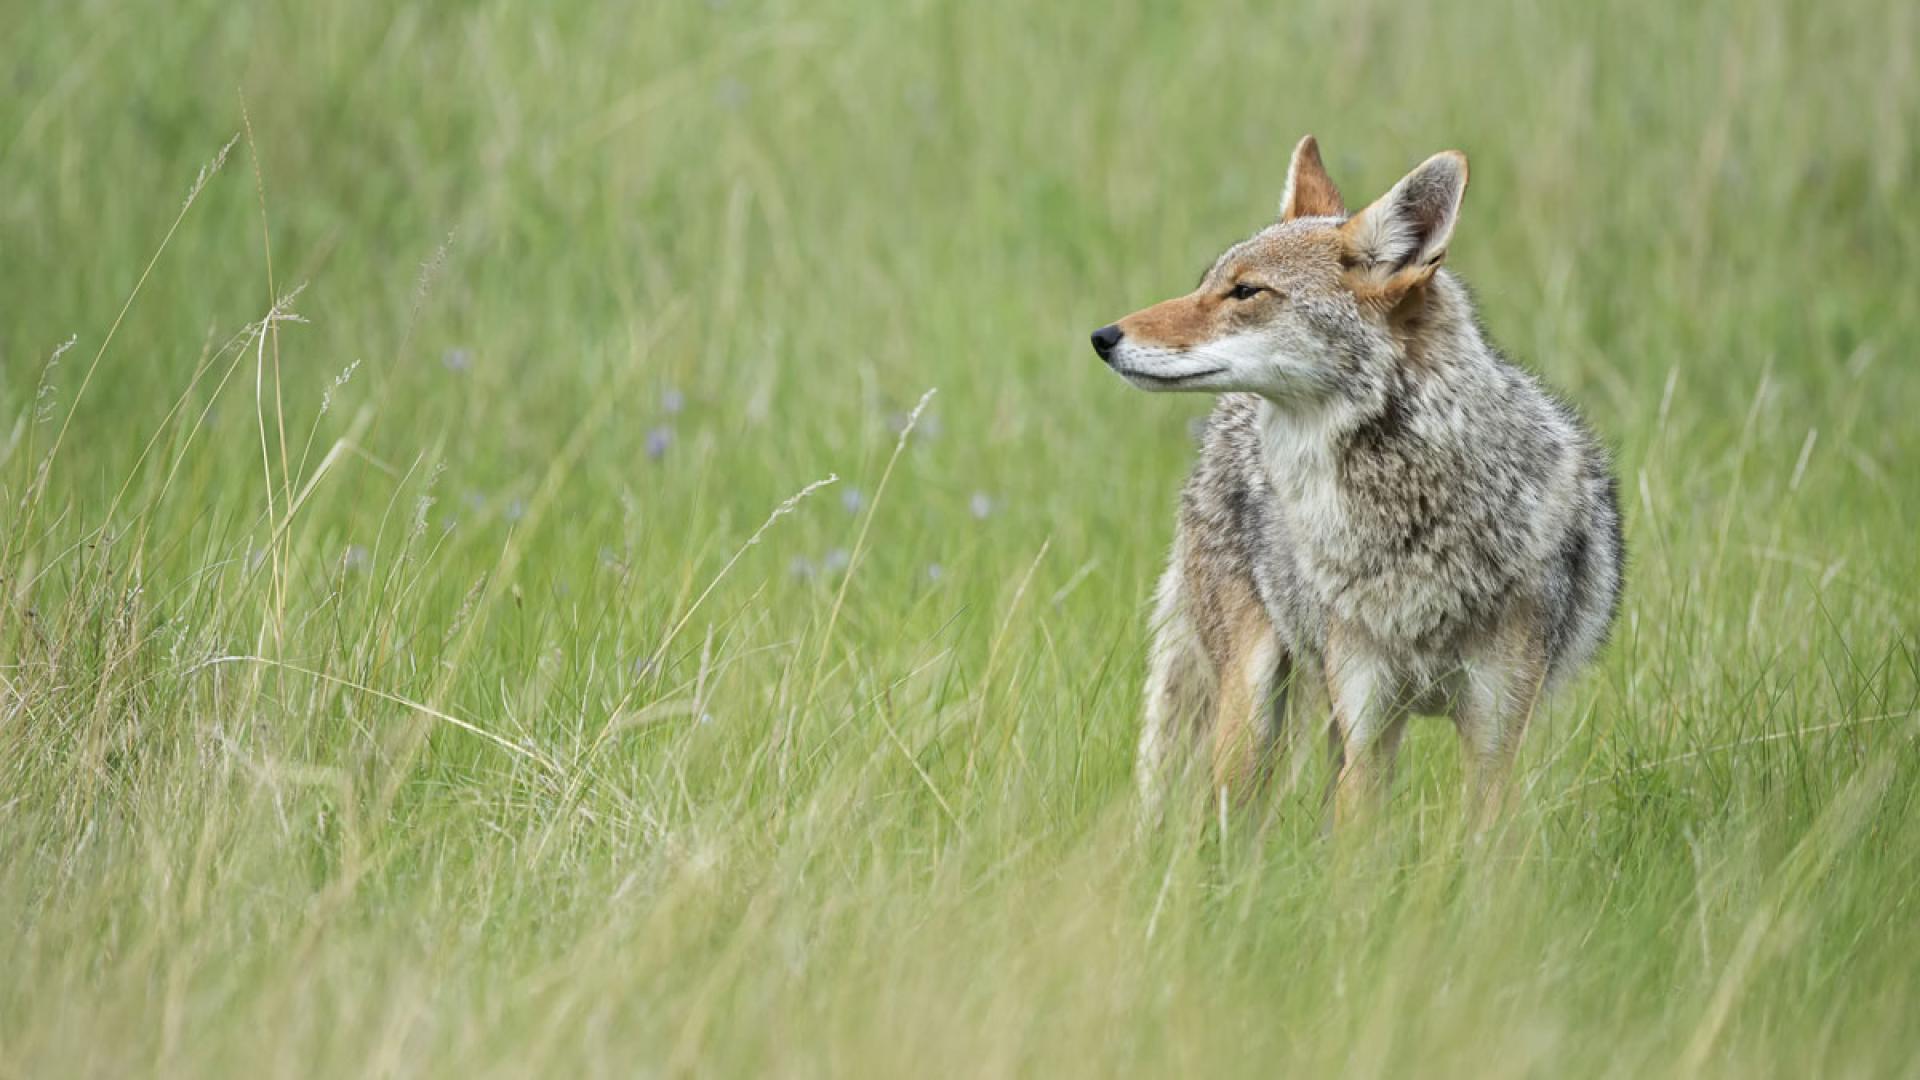 Coyote standing in grass